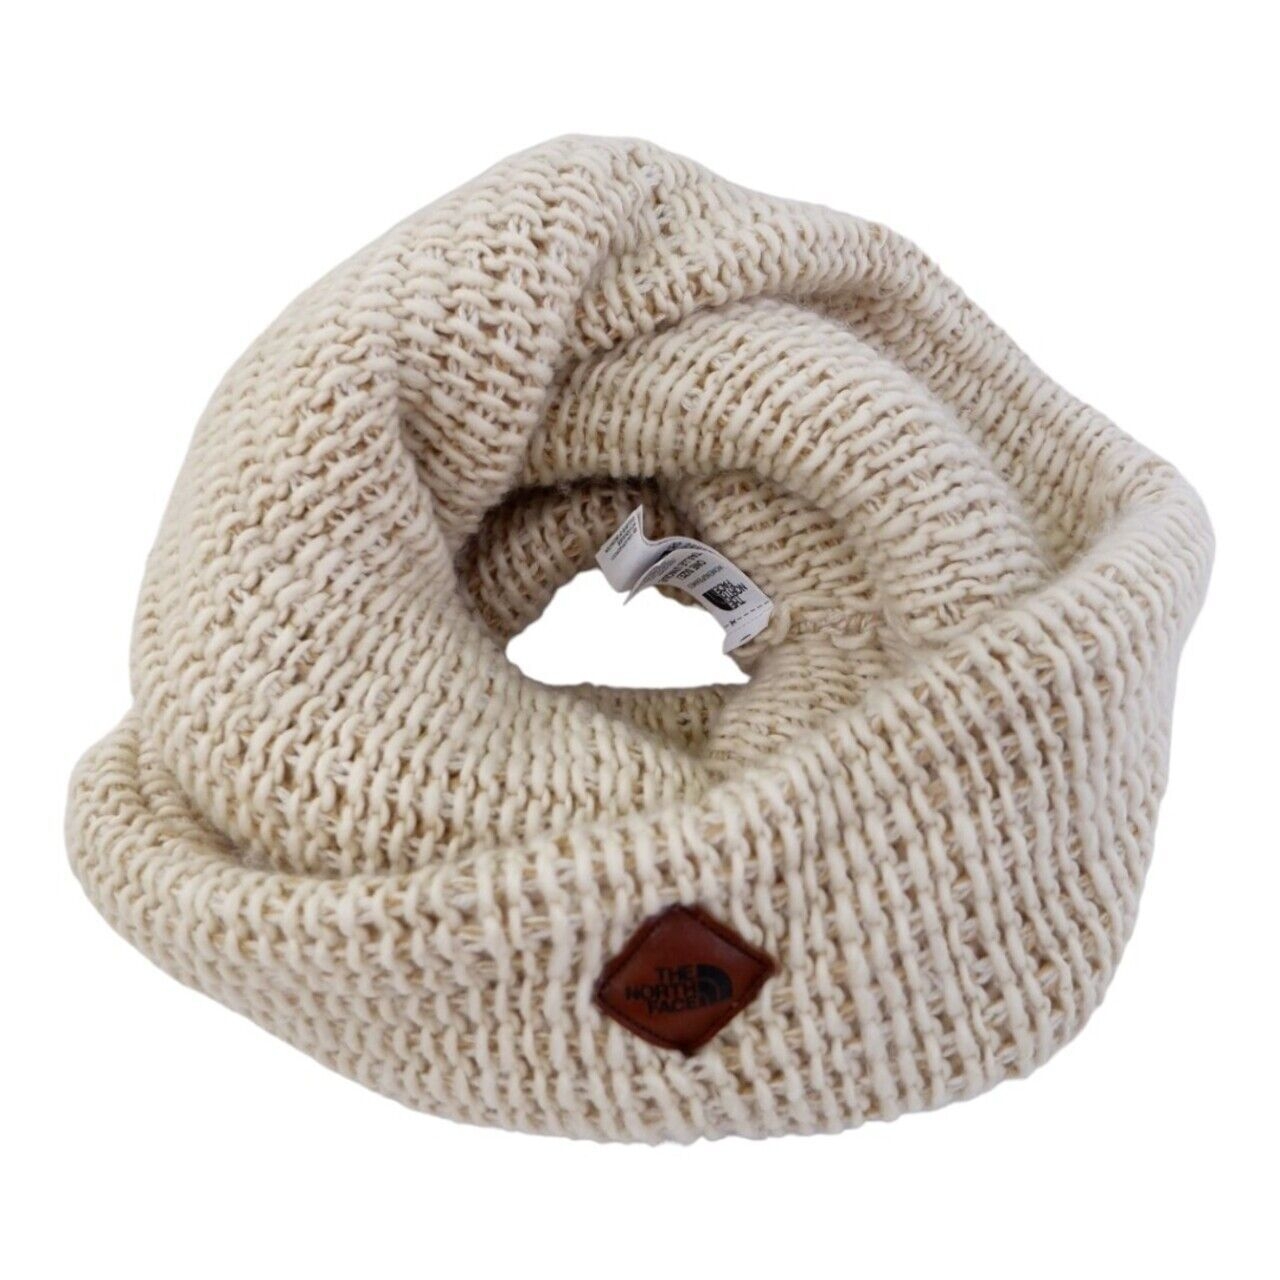 The North Face Beige Scarf